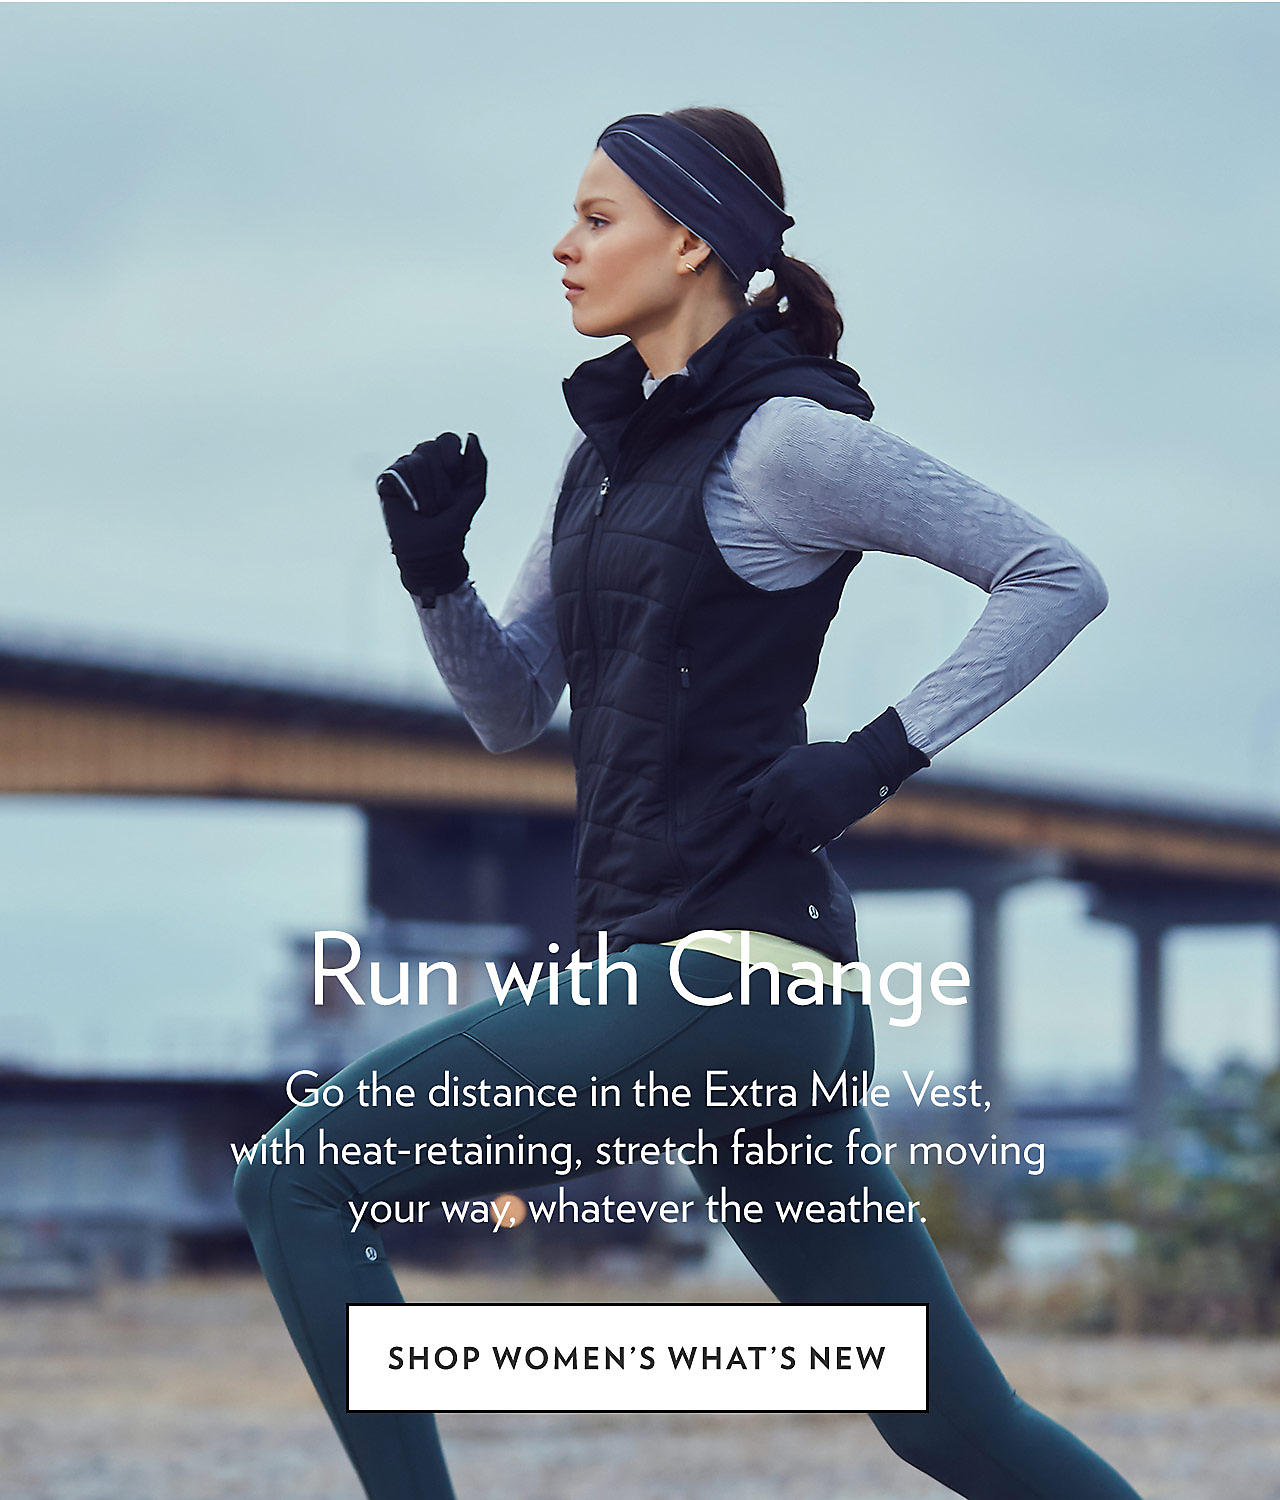 Run with Change - SHOP WOMEN'S WHAT'S NEW